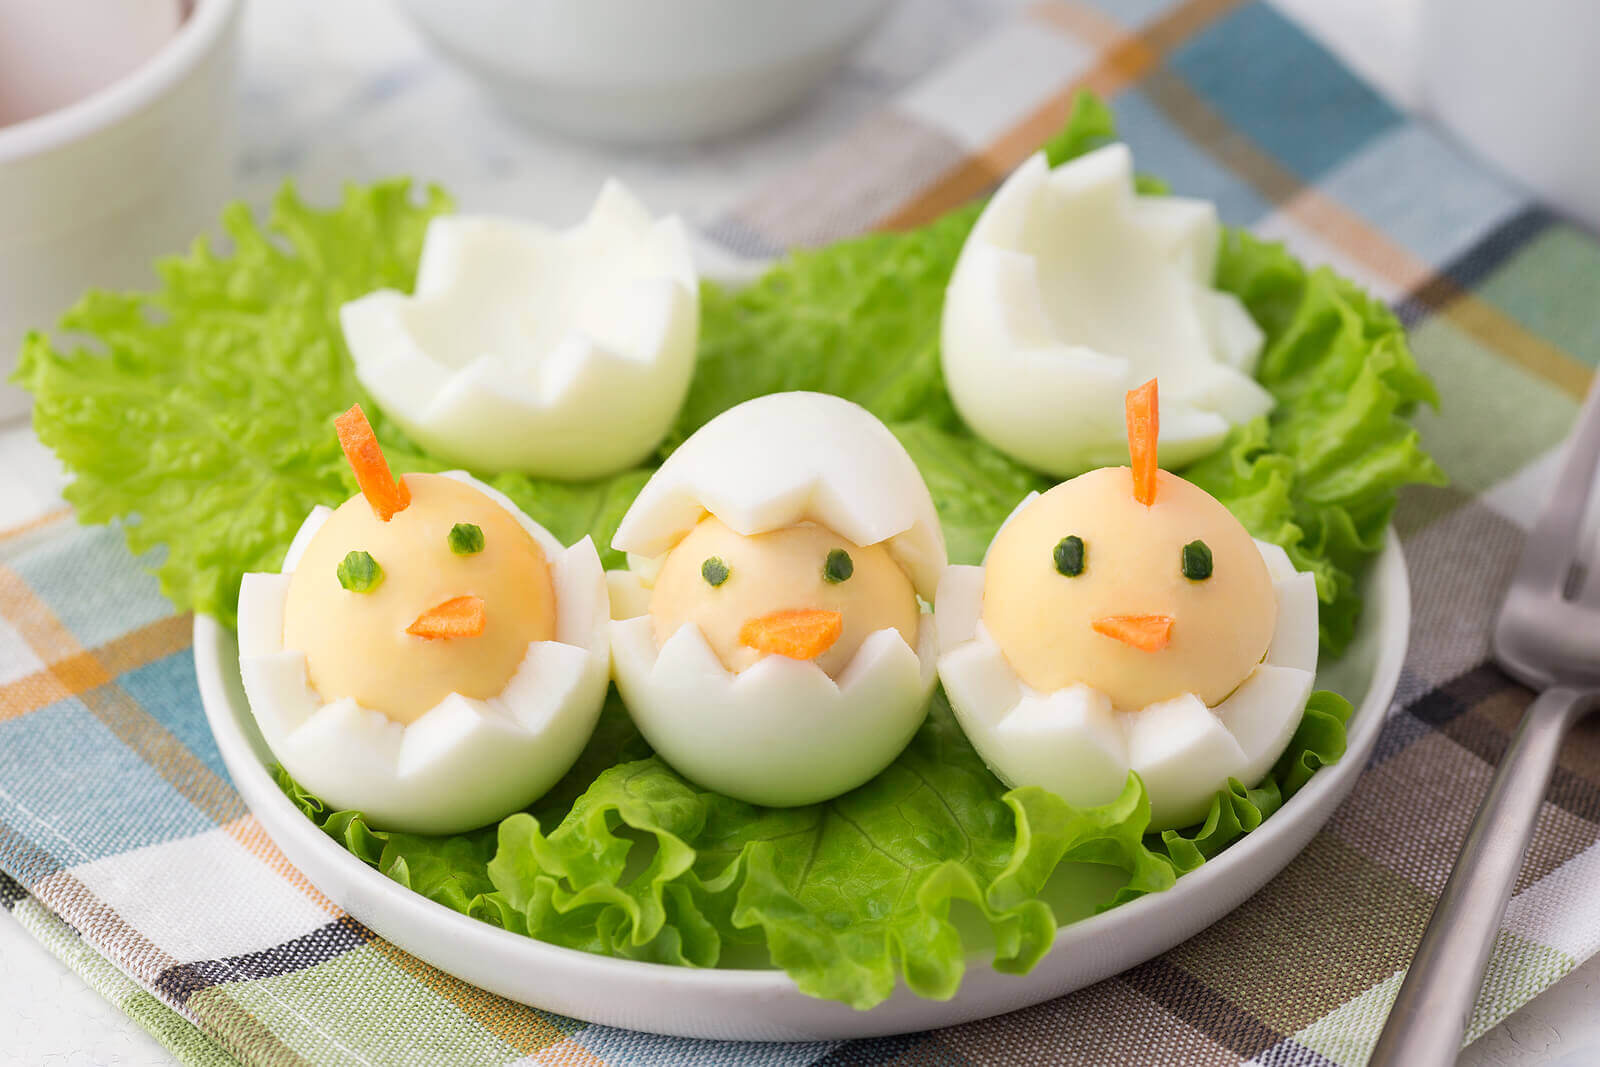 Hard-boiled eggs that are decorated to look like newly-hatched chicks.